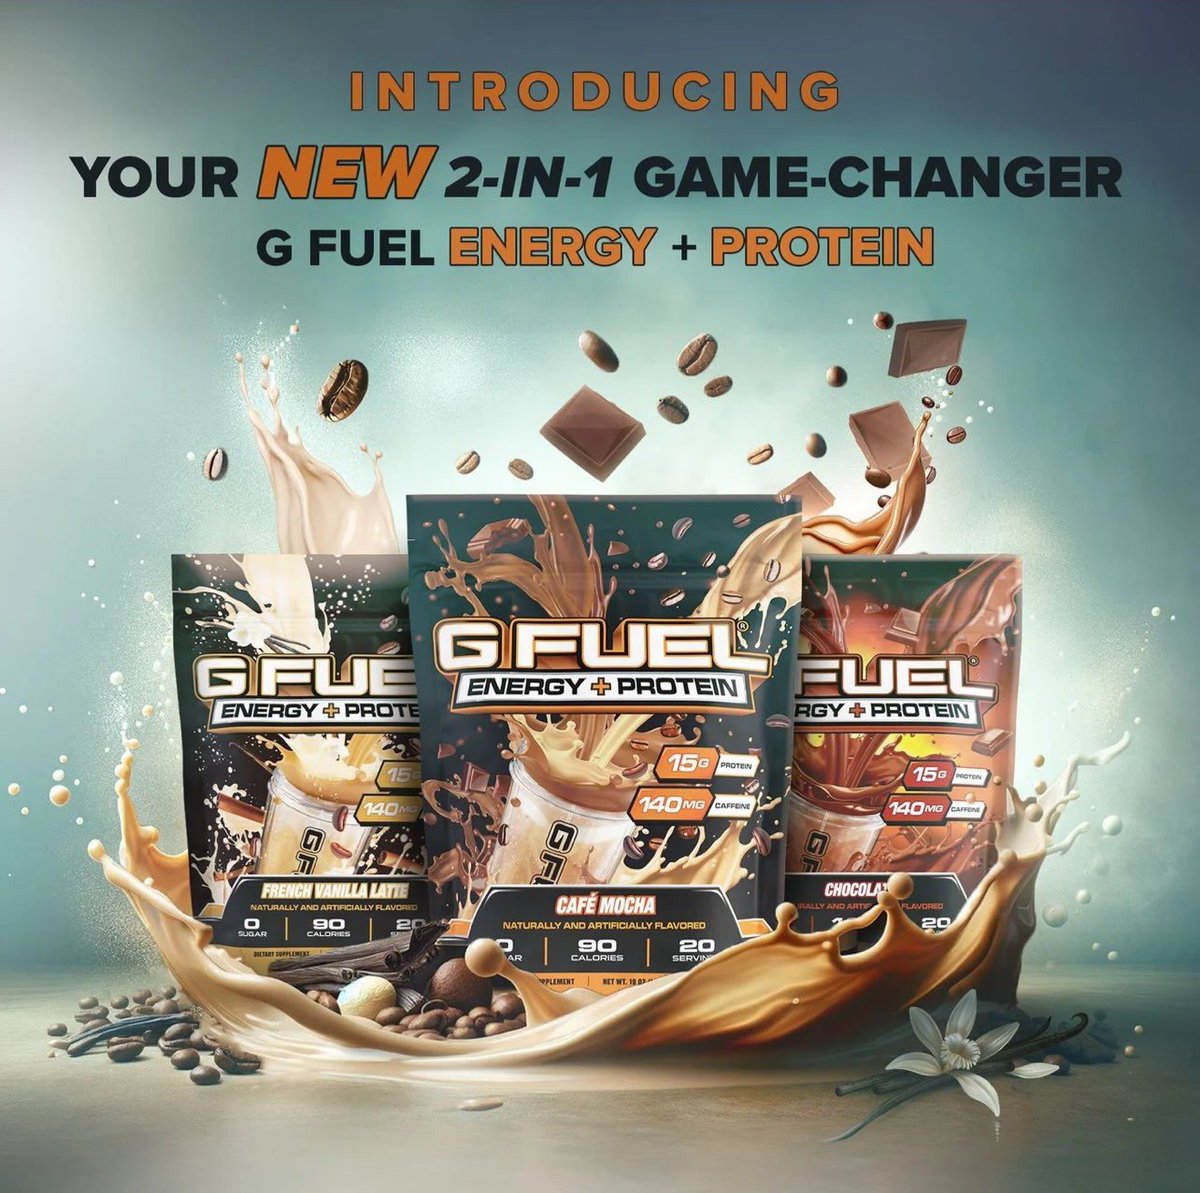 🔥𝐆𝐅𝐔𝐄𝐋 𝐄𝐧𝐞𝐫𝐠𝐲 + 𝐏𝐫𝐨𝐭𝐞𝐢𝐧🔥 🟤ALL NEW FLAVORS. ⚪️MAY 8TH. 🟤CODE KARNAGE. This is a MUST ORDER @GFuelEnergy product, trust us.